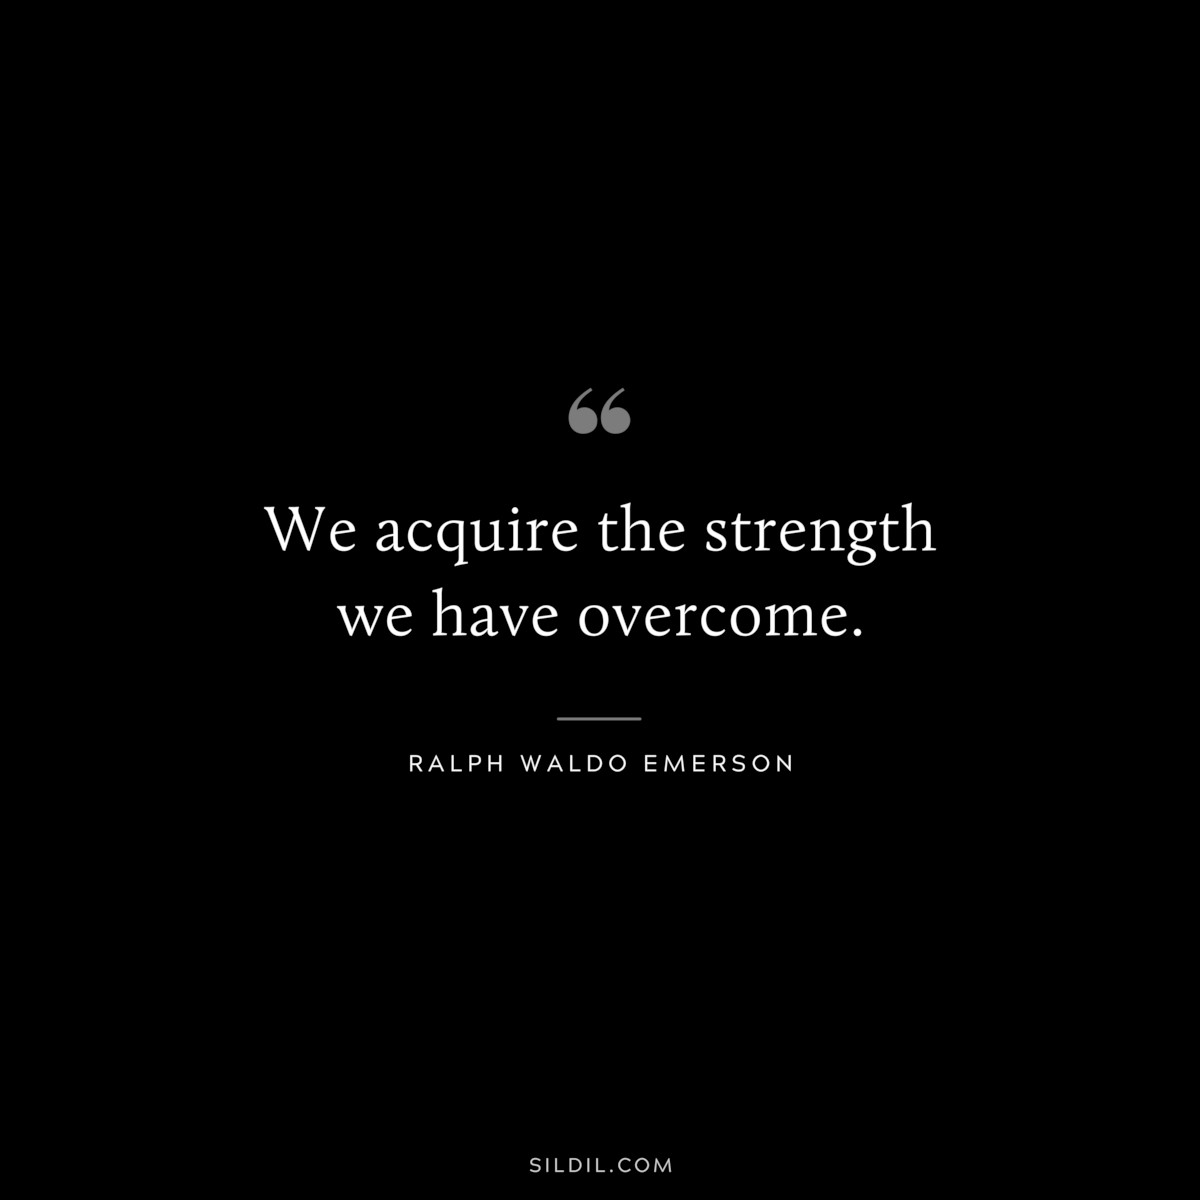 We acquire the strength we have overcome. — Ralph Waldo Emerson